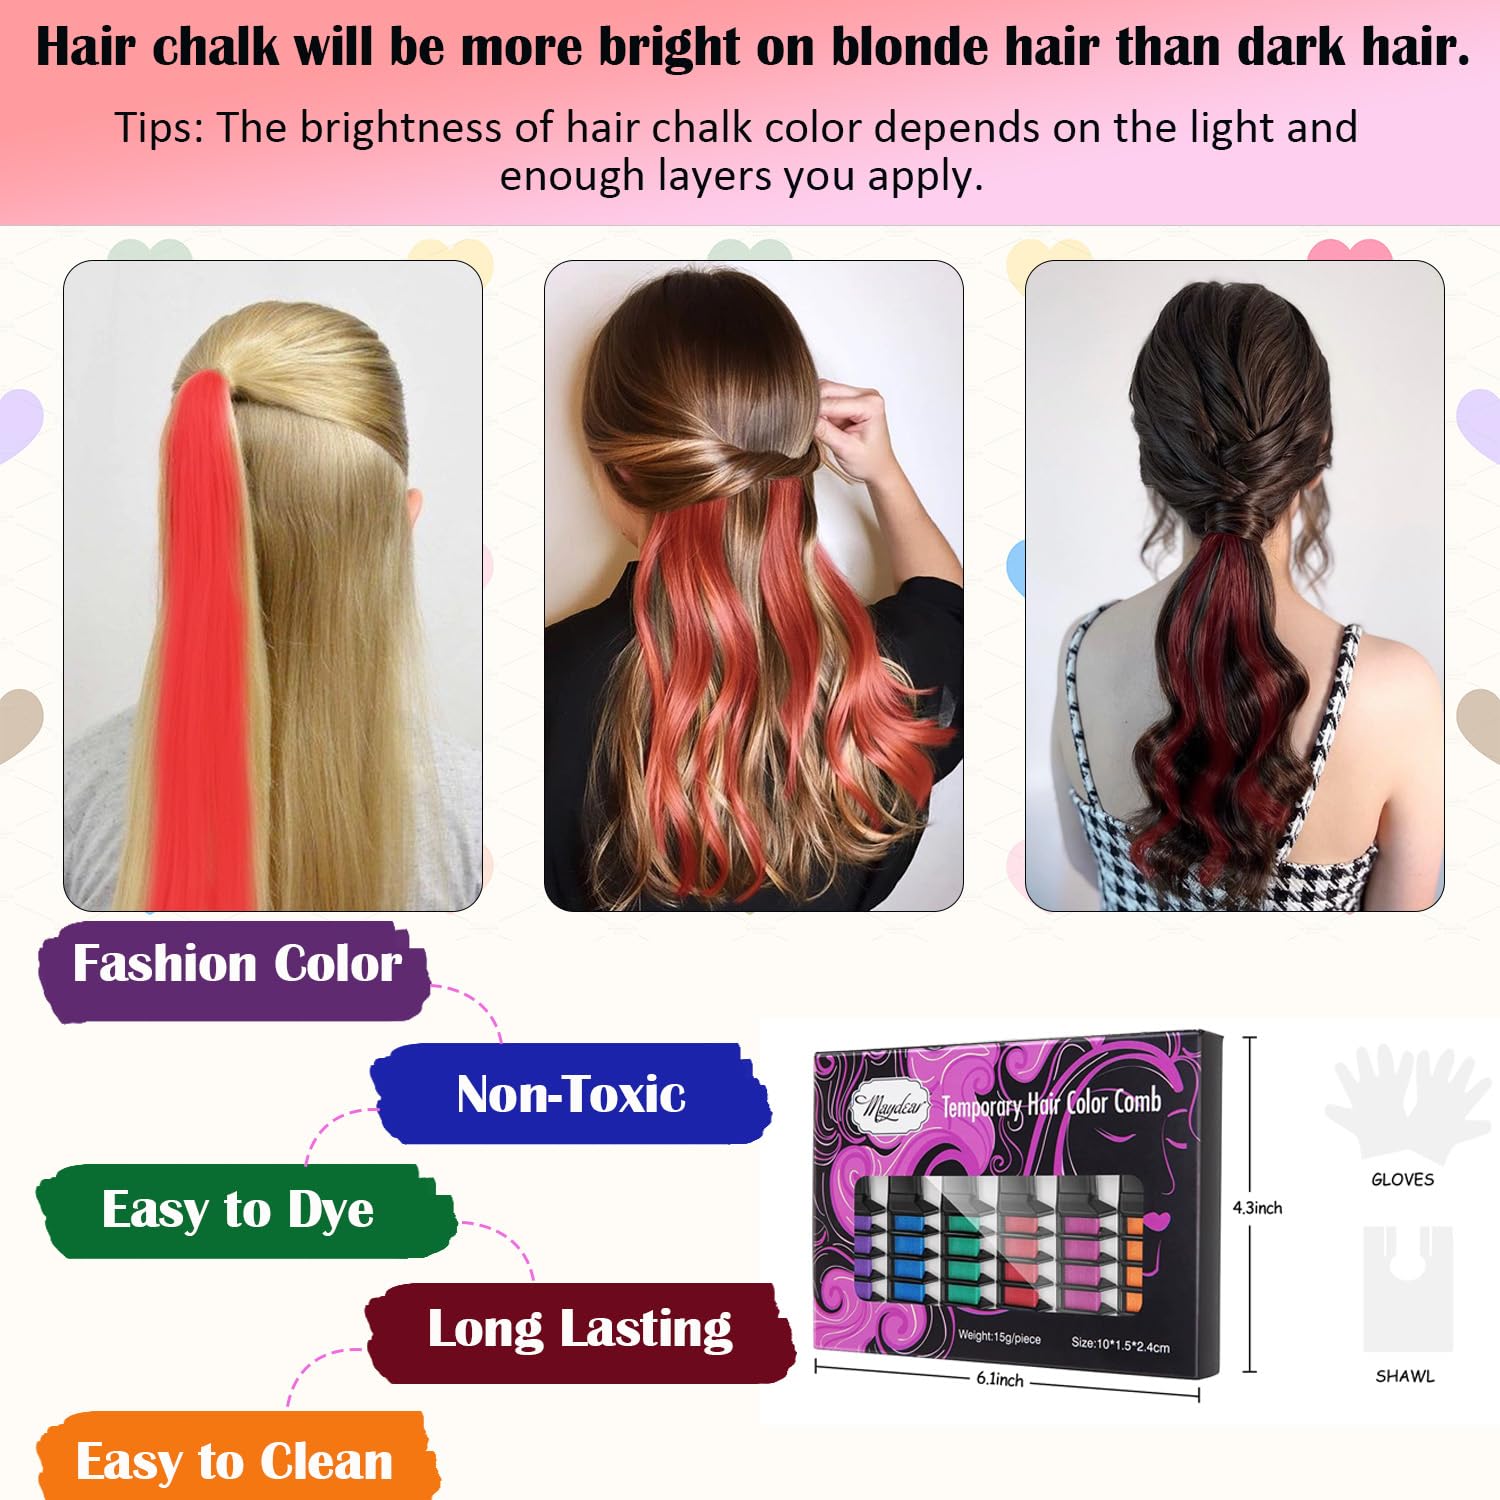 Maydear Hair Chalk Comb for Kids Girls, Temporary Hair Color Kit Non Toxic Washable Hair Dye for Age 4 5 6 7 8 9 10 11 12 Birthday Cosplay Halloween Christmas DIY (6 Colors Set)